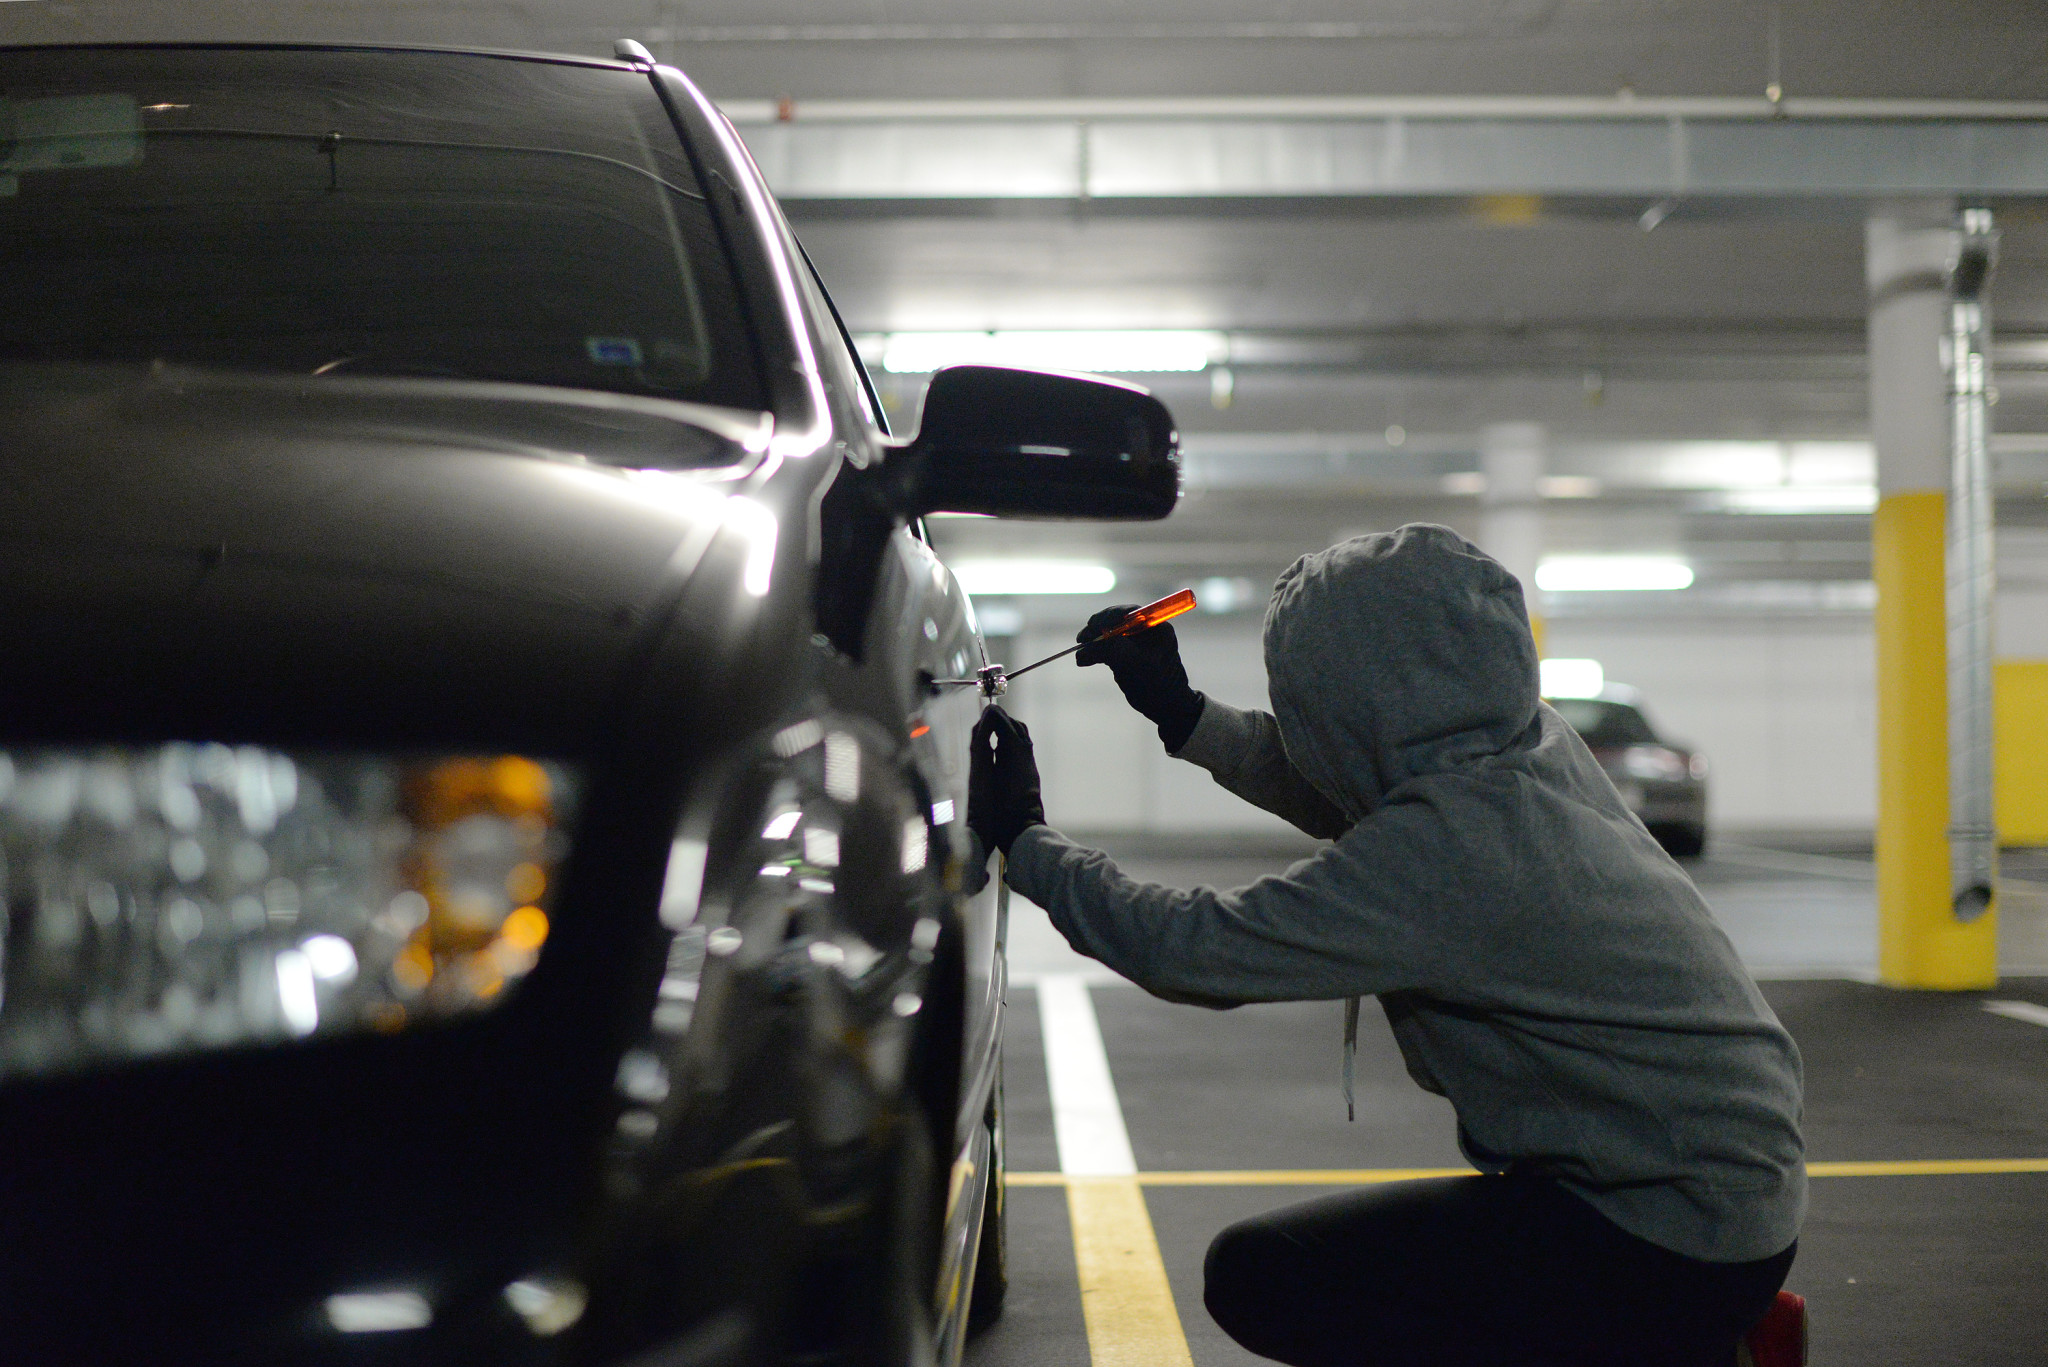 Want to get your car stolen? Visit one of these auto theft 'hotspots'